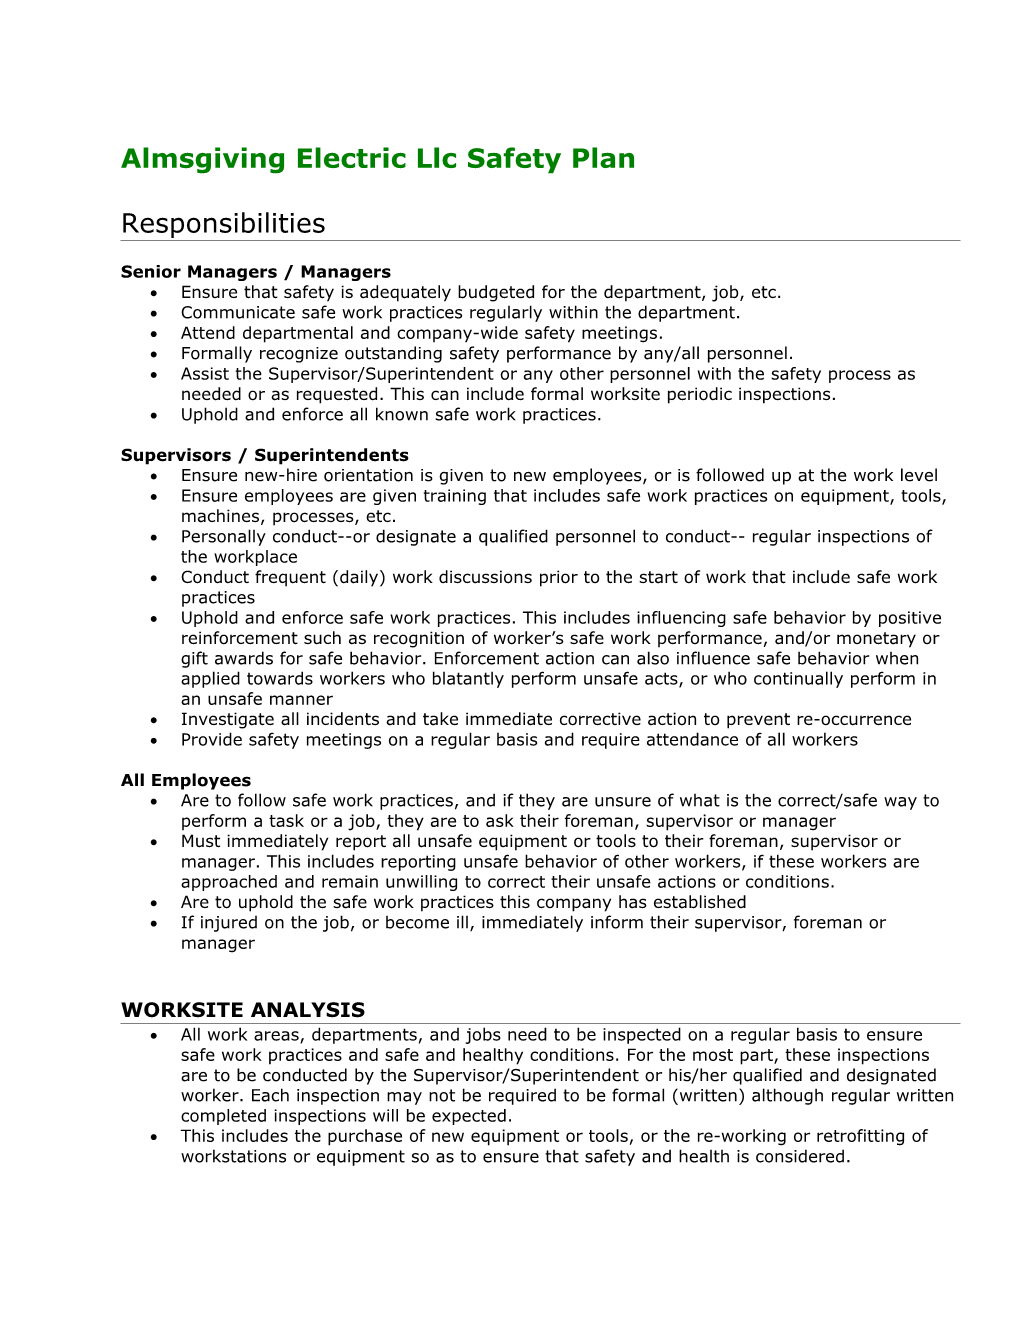 The Safety and Health Policy and Plan